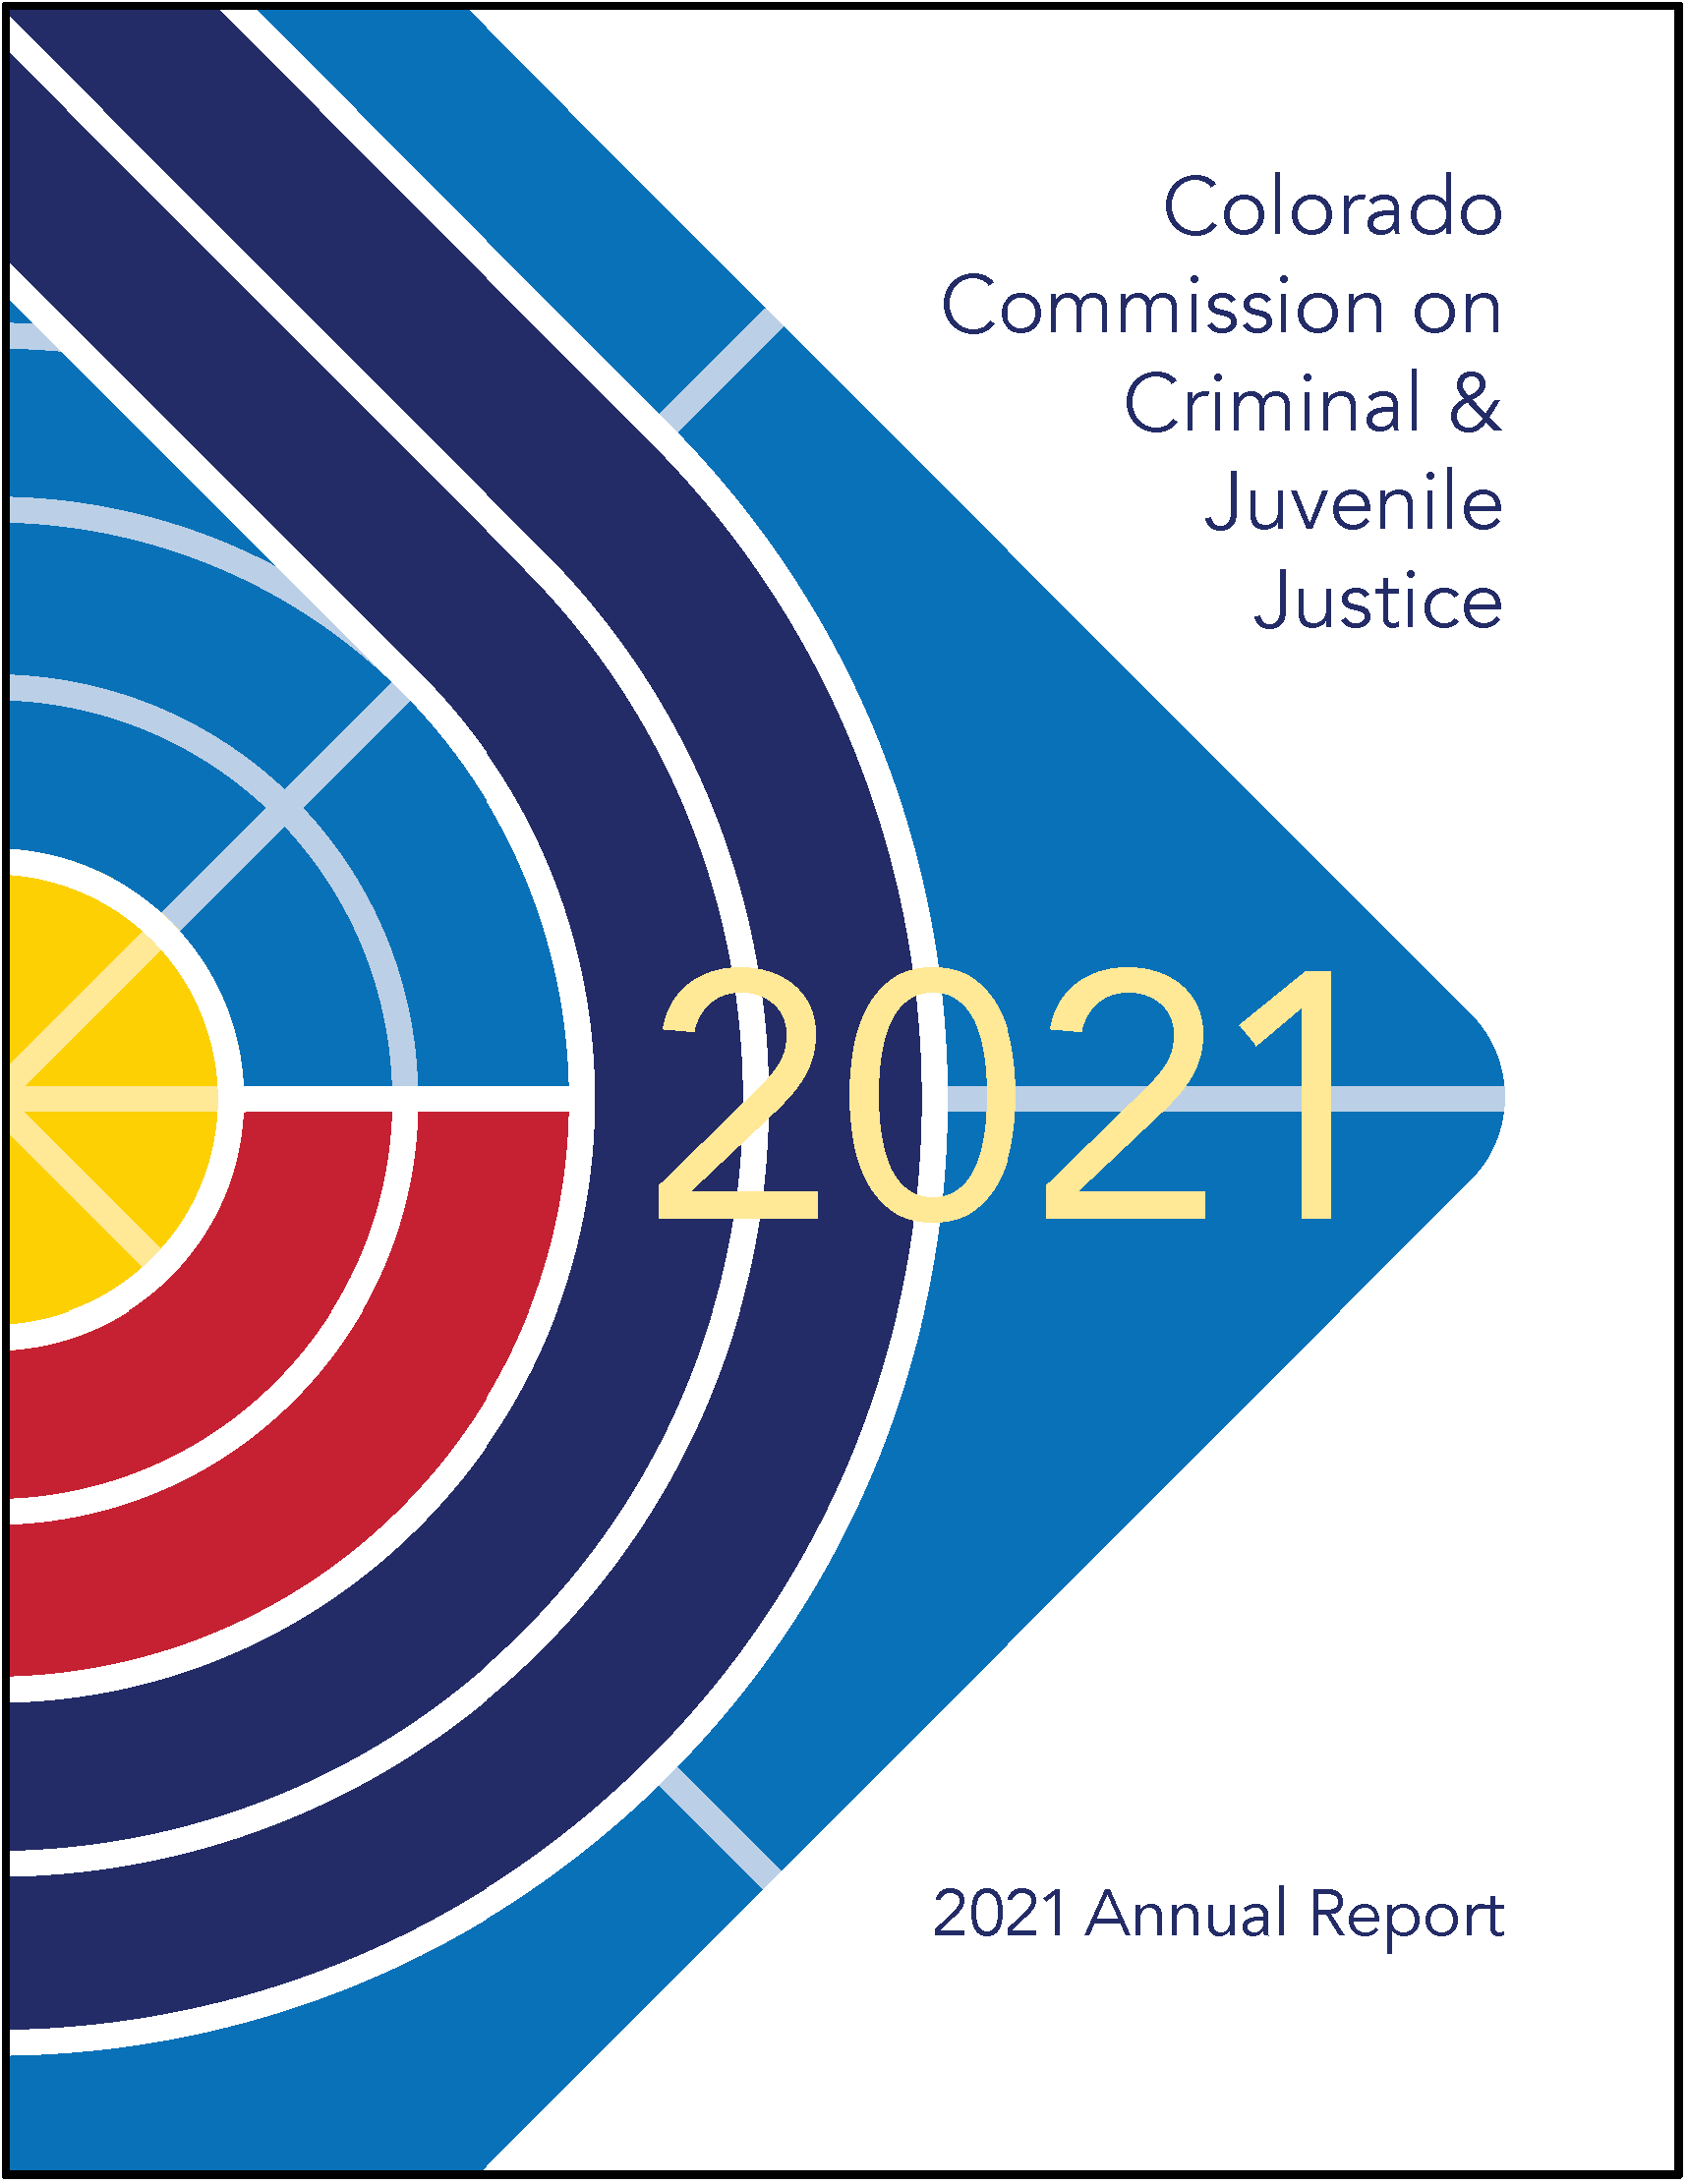 Colorado Commission on Criminal and Juvenile Justice: FY 2021 Annual Report